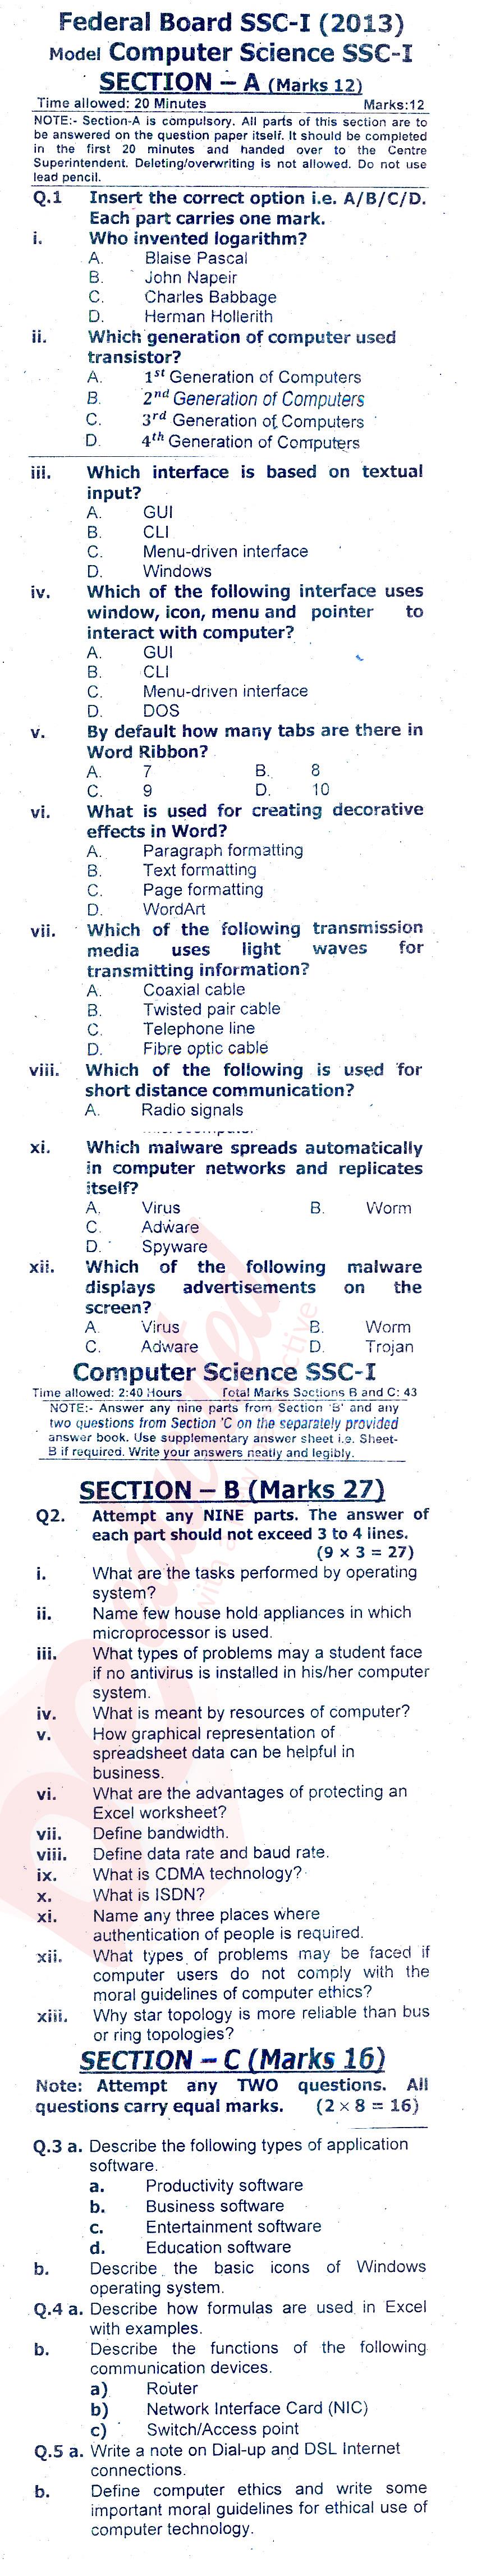 Computer Science 9th class Past Paper Group 1 Federal BISE  2013